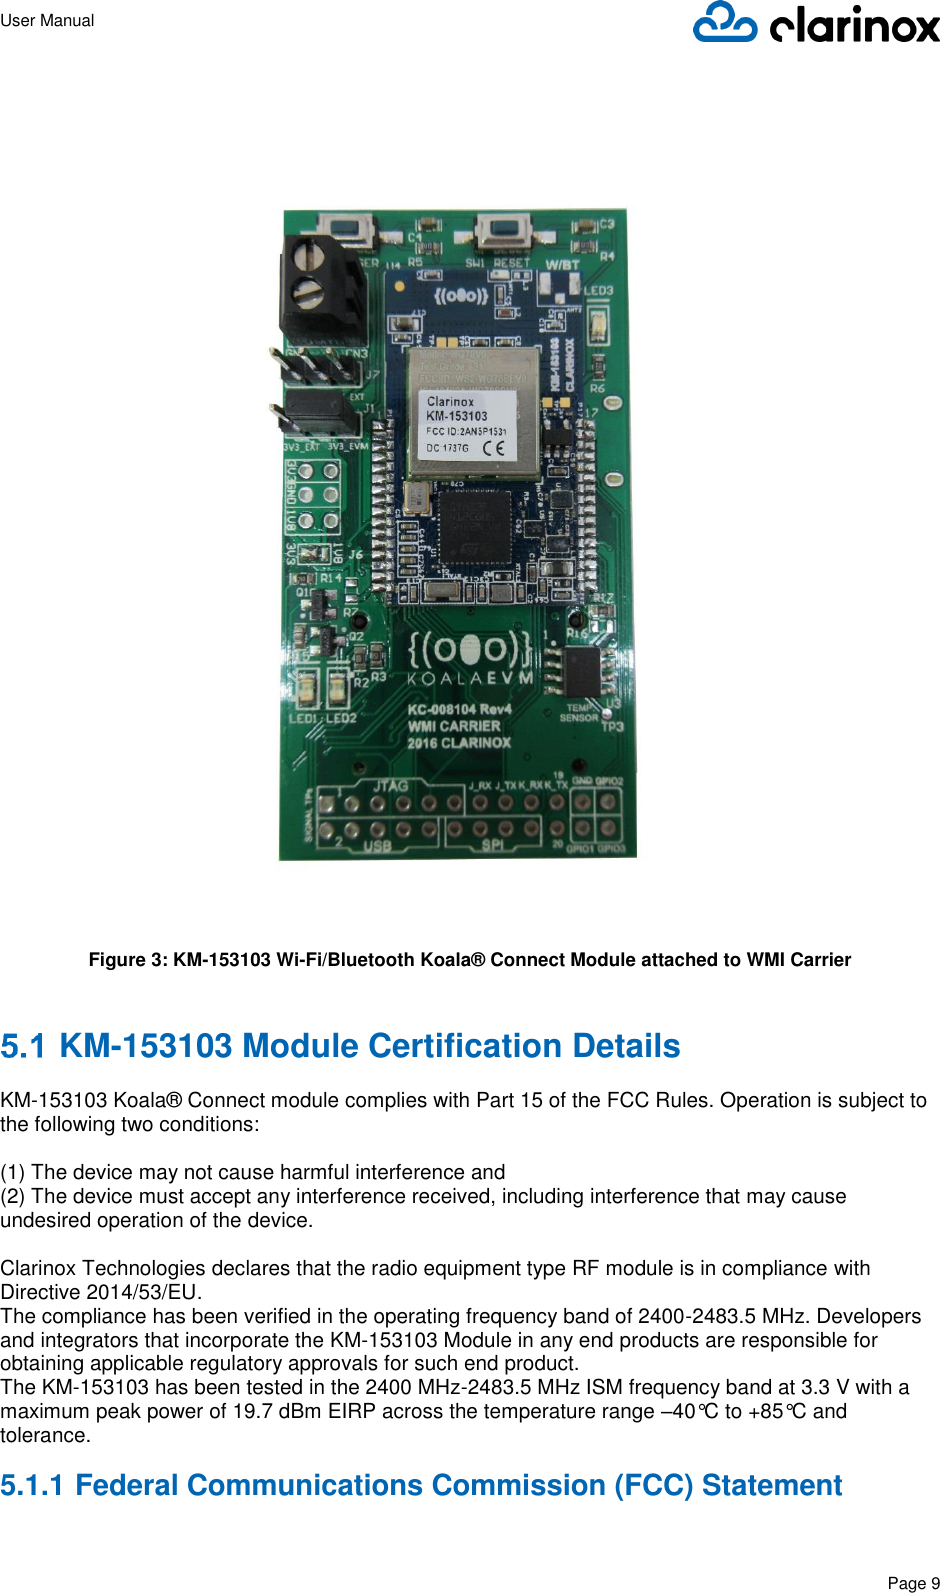 User Manual      Page 9   Figure 3: KM-153103 Wi-Fi/Bluetooth Koala® Connect Module attached to WMI Carrier   KM-153103 Module Certification Details  KM-153103 Koala® Connect module complies with Part 15 of the FCC Rules. Operation is subject to the following two conditions:  (1) The device may not cause harmful interference and (2) The device must accept any interference received, including interference that may cause undesired operation of the device.  Clarinox Technologies declares that the radio equipment type RF module is in compliance with Directive 2014/53/EU. The compliance has been verified in the operating frequency band of 2400-2483.5 MHz. Developers and integrators that incorporate the KM-153103 Module in any end products are responsible for obtaining applicable regulatory approvals for such end product. The KM-153103 has been tested in the 2400 MHz-2483.5 MHz ISM frequency band at 3.3 V with a maximum peak power of 19.7 dBm EIRP across the temperature range –40°C to +85°C and tolerance. 5.1.1 Federal Communications Commission (FCC) Statement  